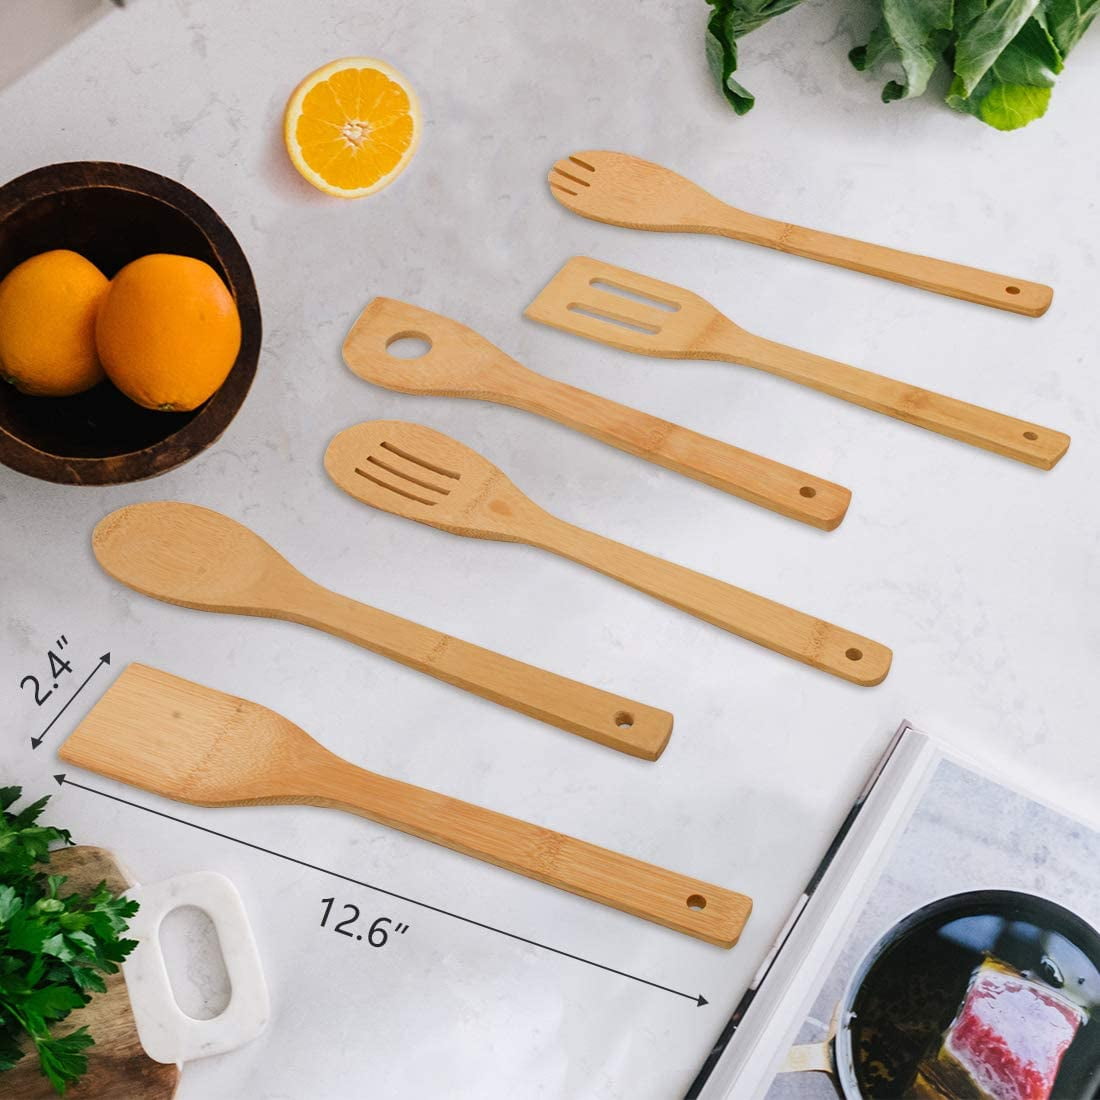 Bamboo Wooden Spoons for Stitch Cooking Kitchen,Lilo Premium Quality  Cartoon Spoons Wooden Utensil Set,6 PCS Fun Kitchen Cookware Set  Accessories